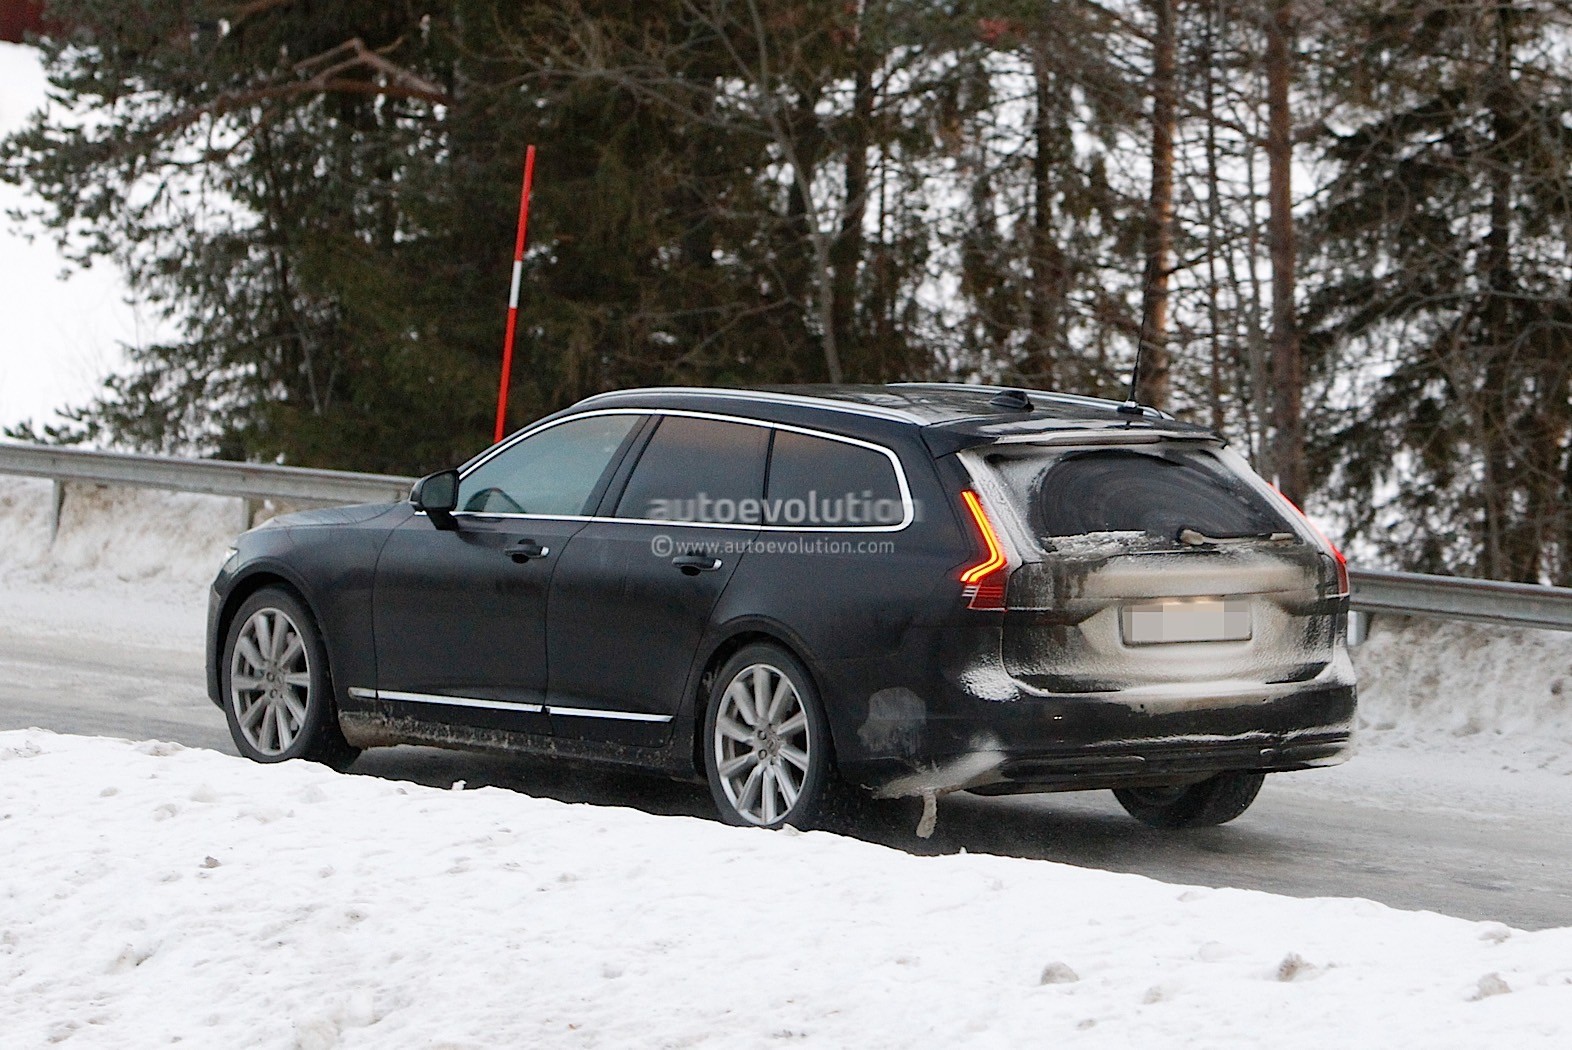 https://s1.cdn.autoevolution.com/images/news/gallery/2021-volvo-s90-and-v90-facelift-wear-useless-camouflage-winter-testing_10.jpg